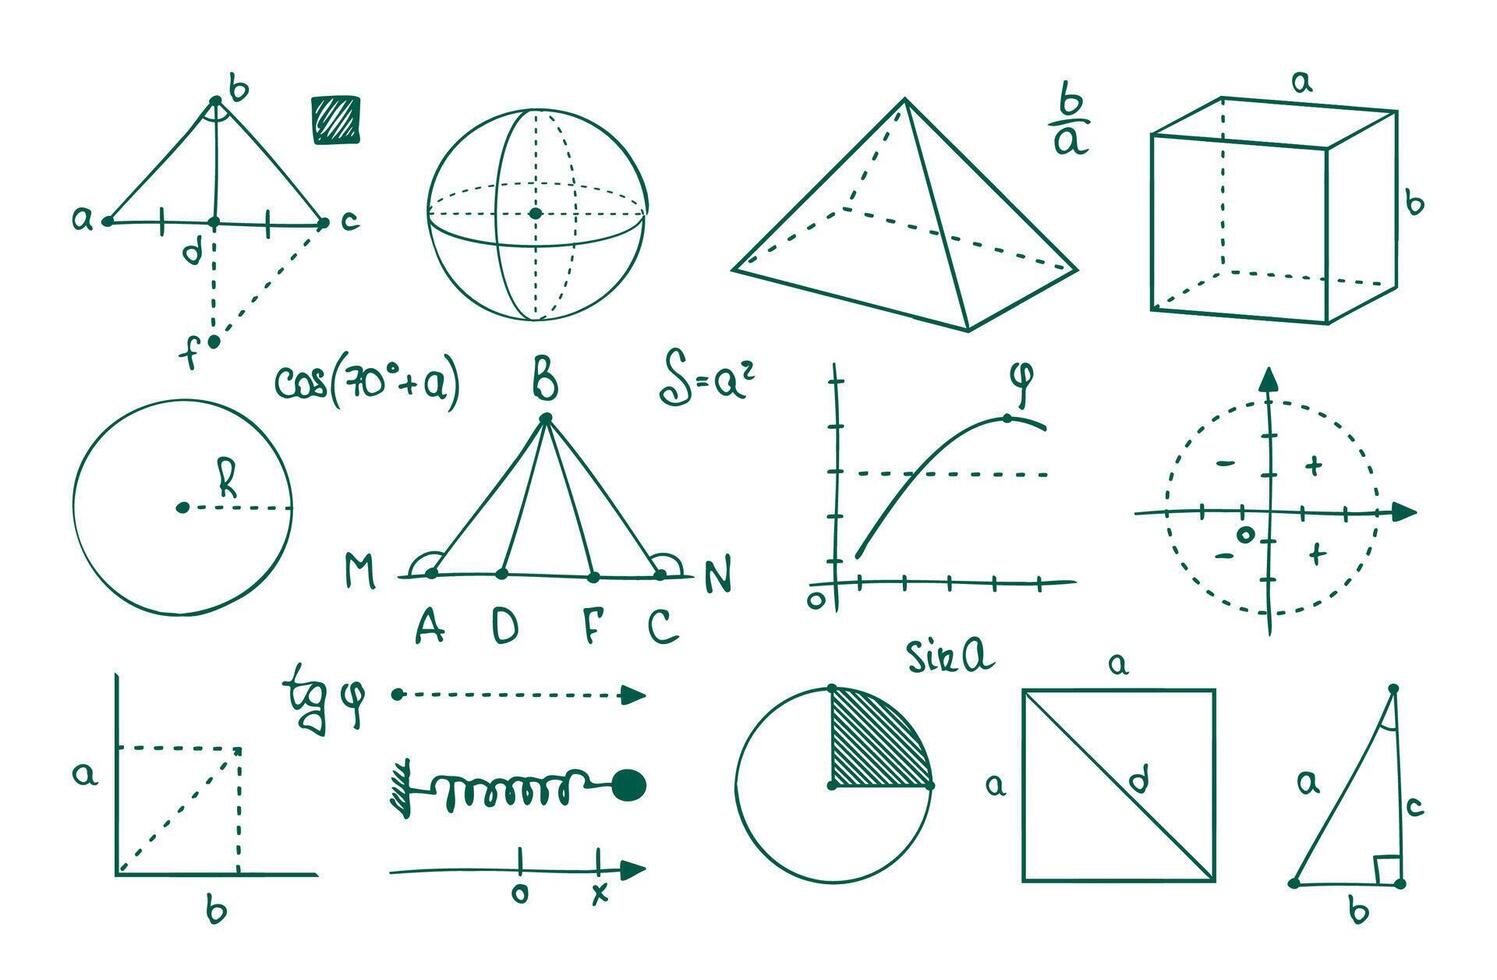 Math graphs. Parabolas, cosine, sine and tangent curves. Geometric figures and functions. Vector college algebraic symbols